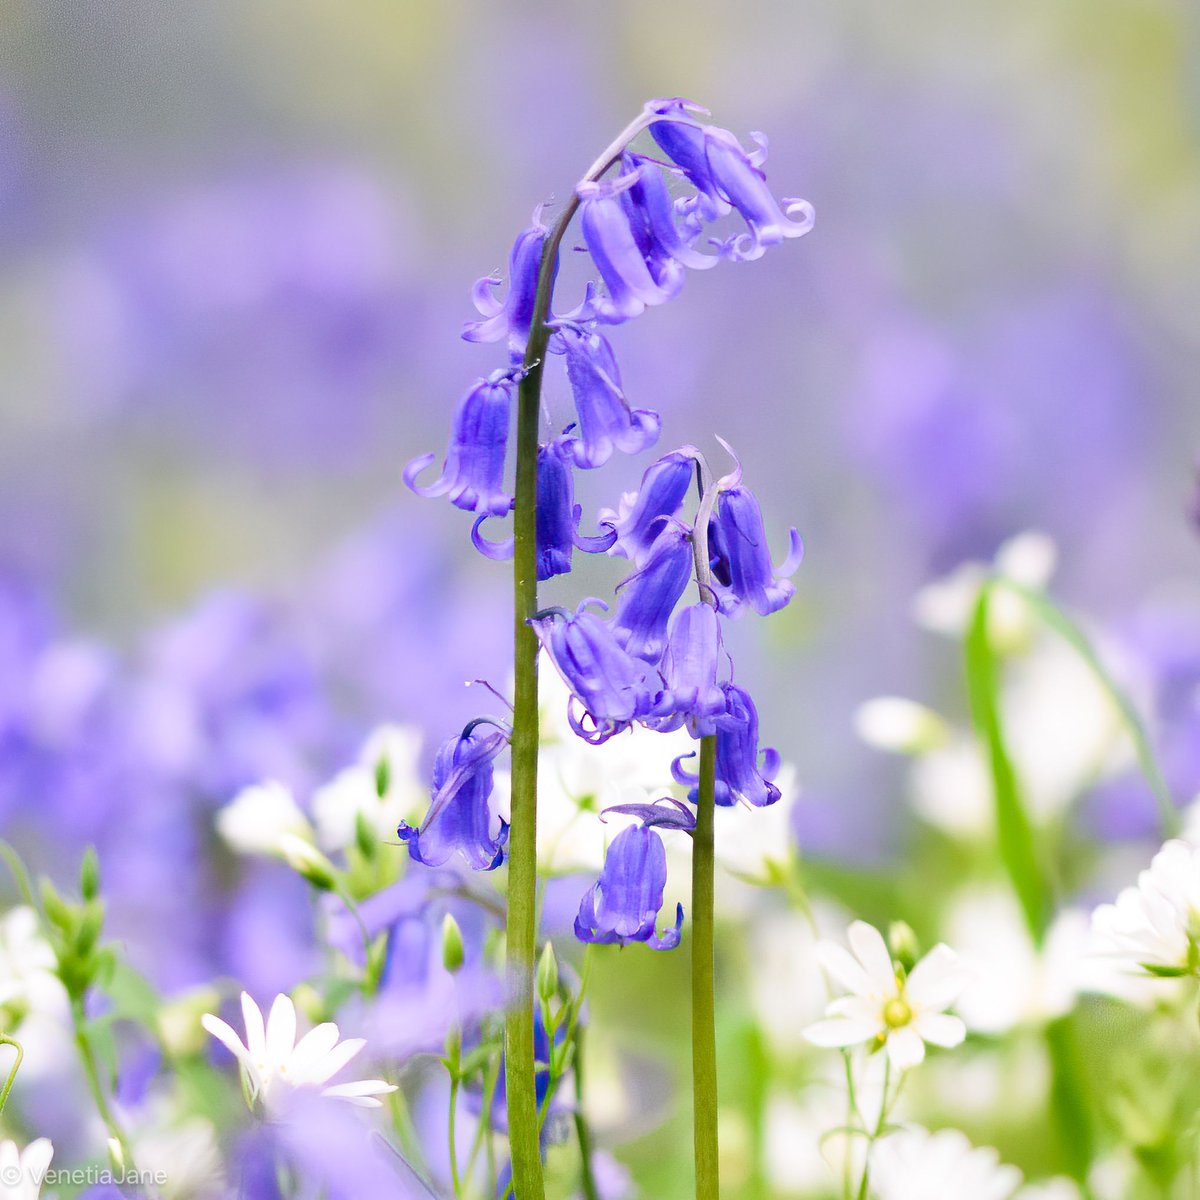 In her book ‘The Garden of the Nightingale’, Minnie Aumônier (1865-1952) describes bluebells as the “joybells of Spring” that “spread their carpet of delight”, and I couldn’t agree more! #nature #wildflowers